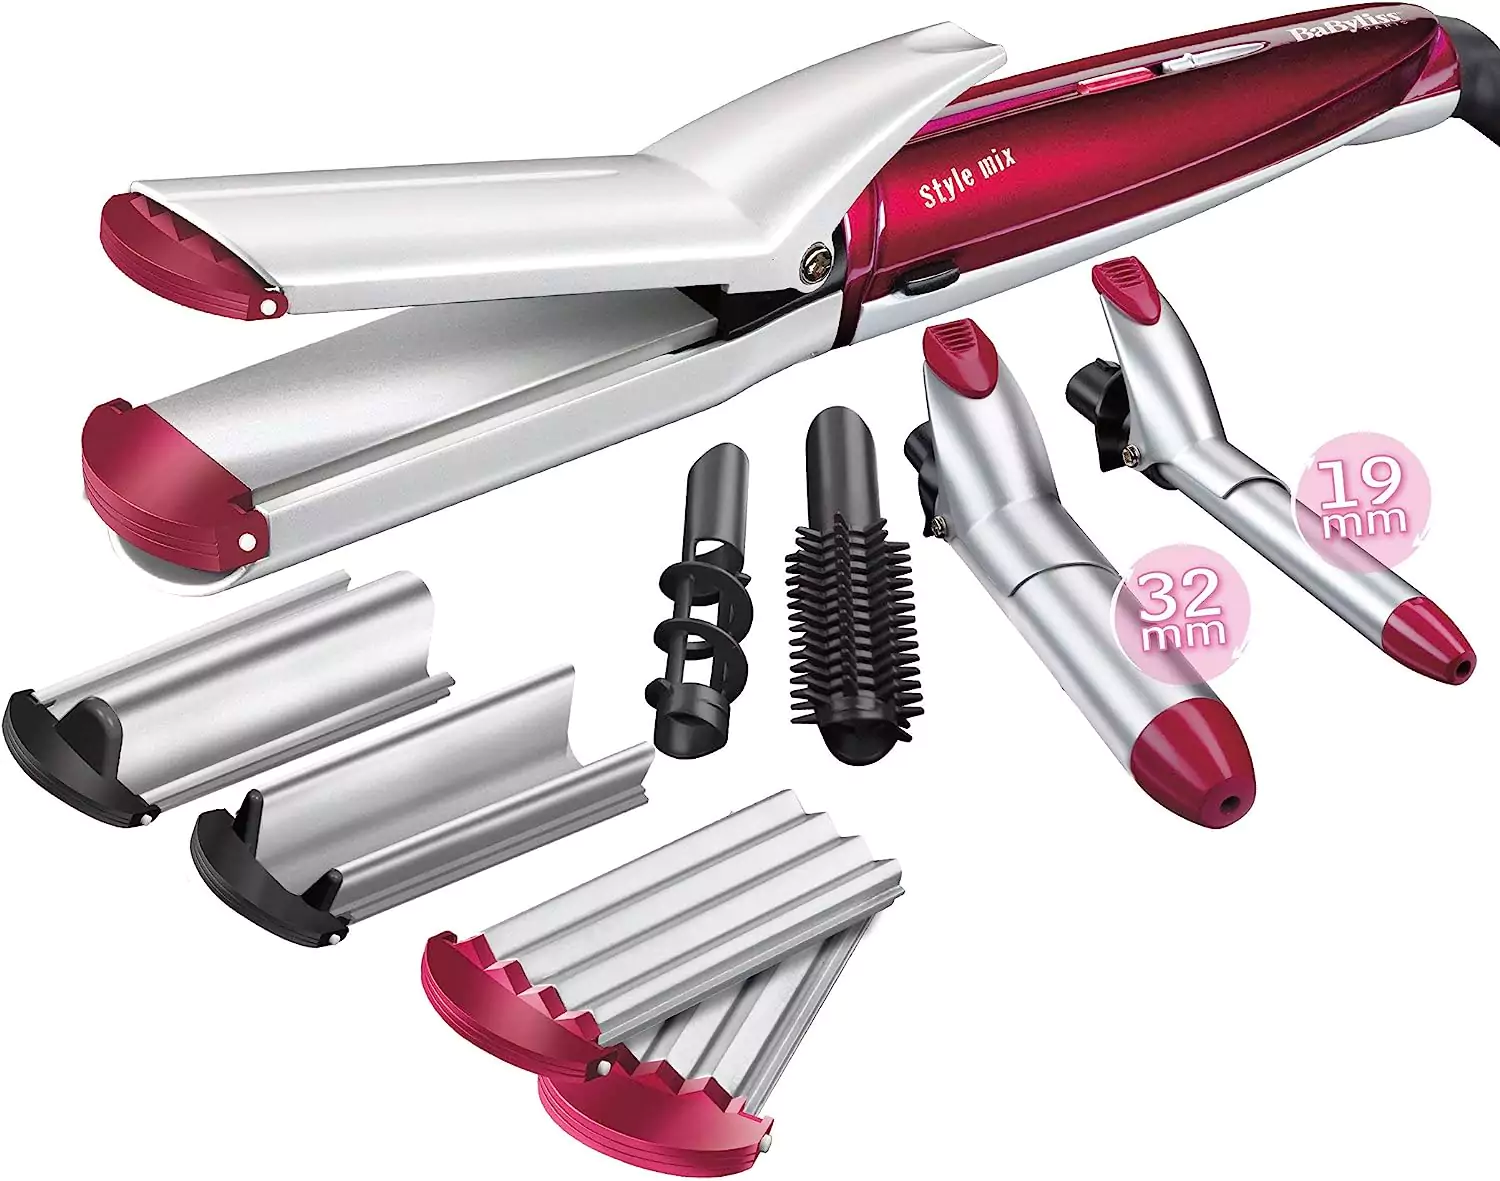 Babyliss 10-in-1 Multifunctional Hair Styling Set with Ceramic Brush, Purple, MS22SDE